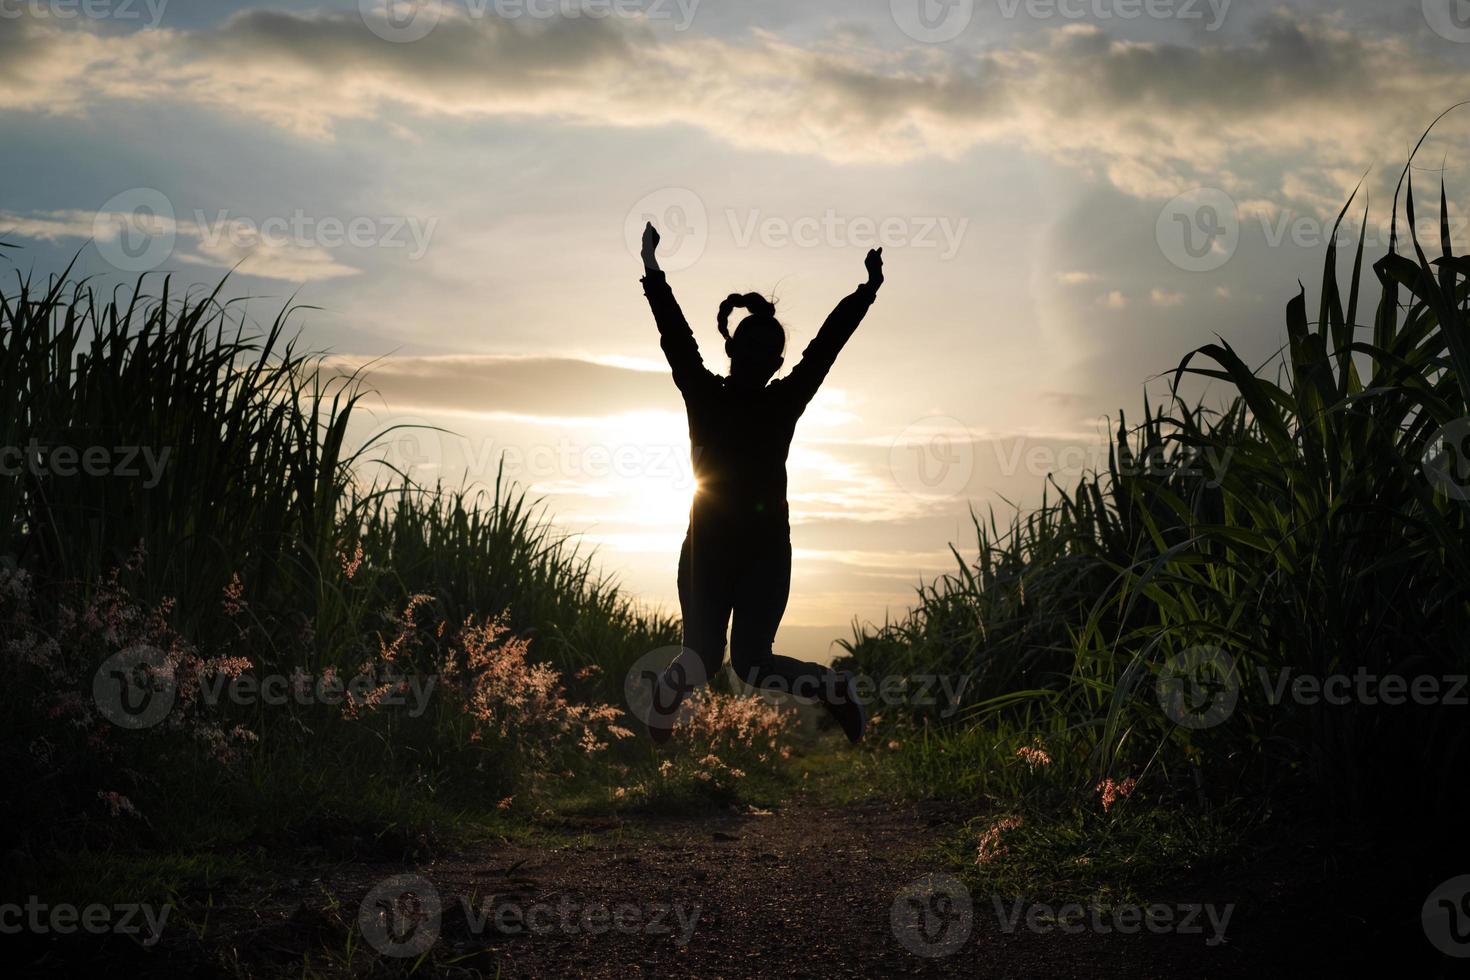 Farmer woman silhouette jump in the sugar cane plantation in the background sunset evening photo